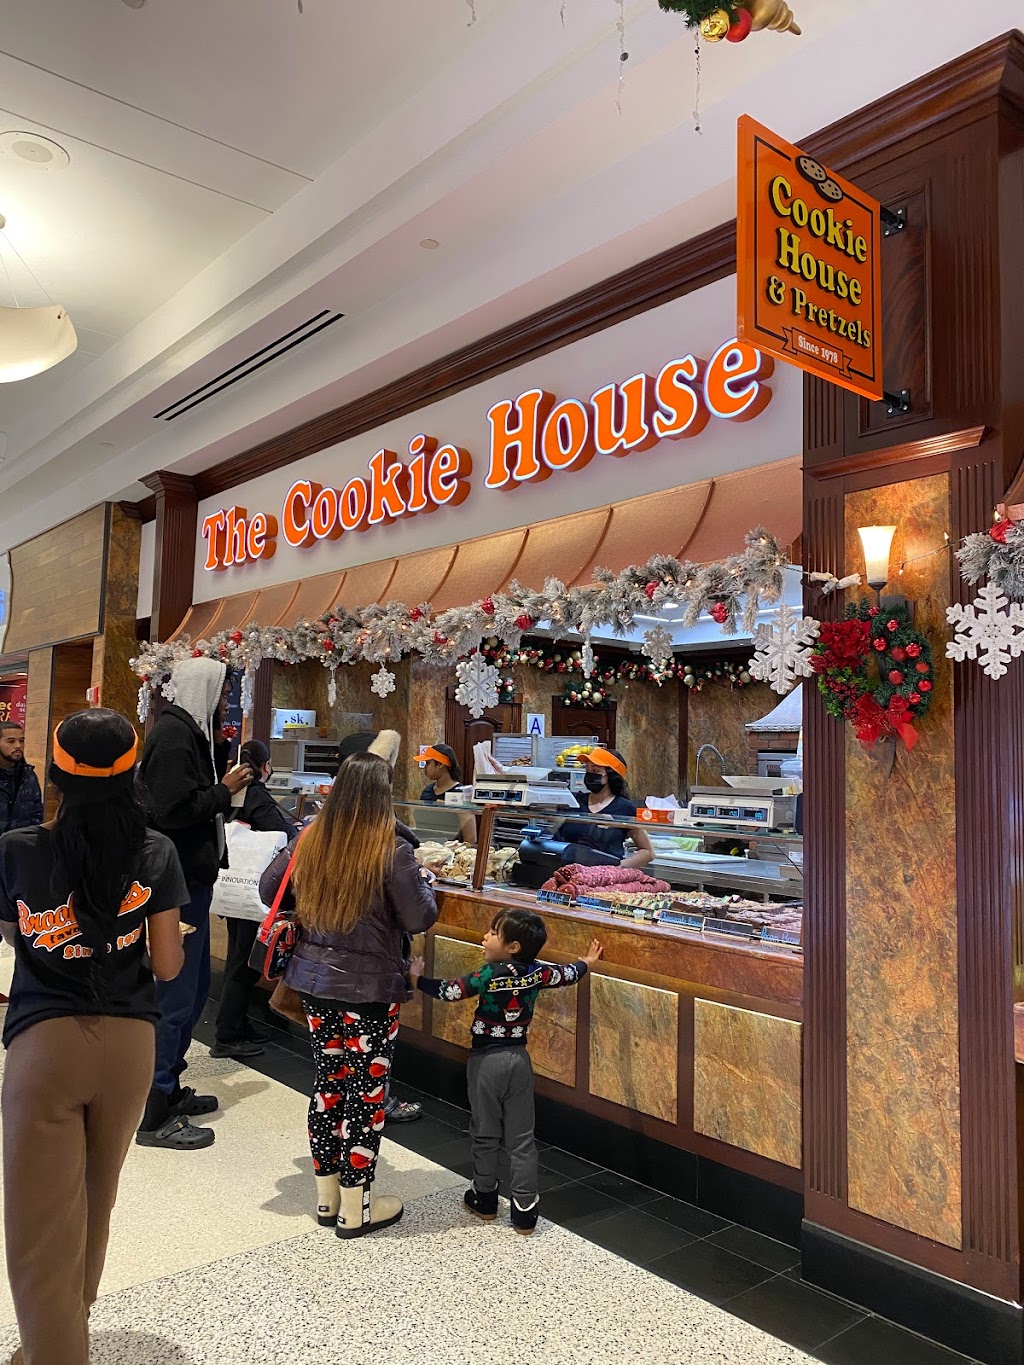 The Cookie House | 5100 Kings Plaza, Brooklyn, NY 11234 | Phone: (718) 252-6483